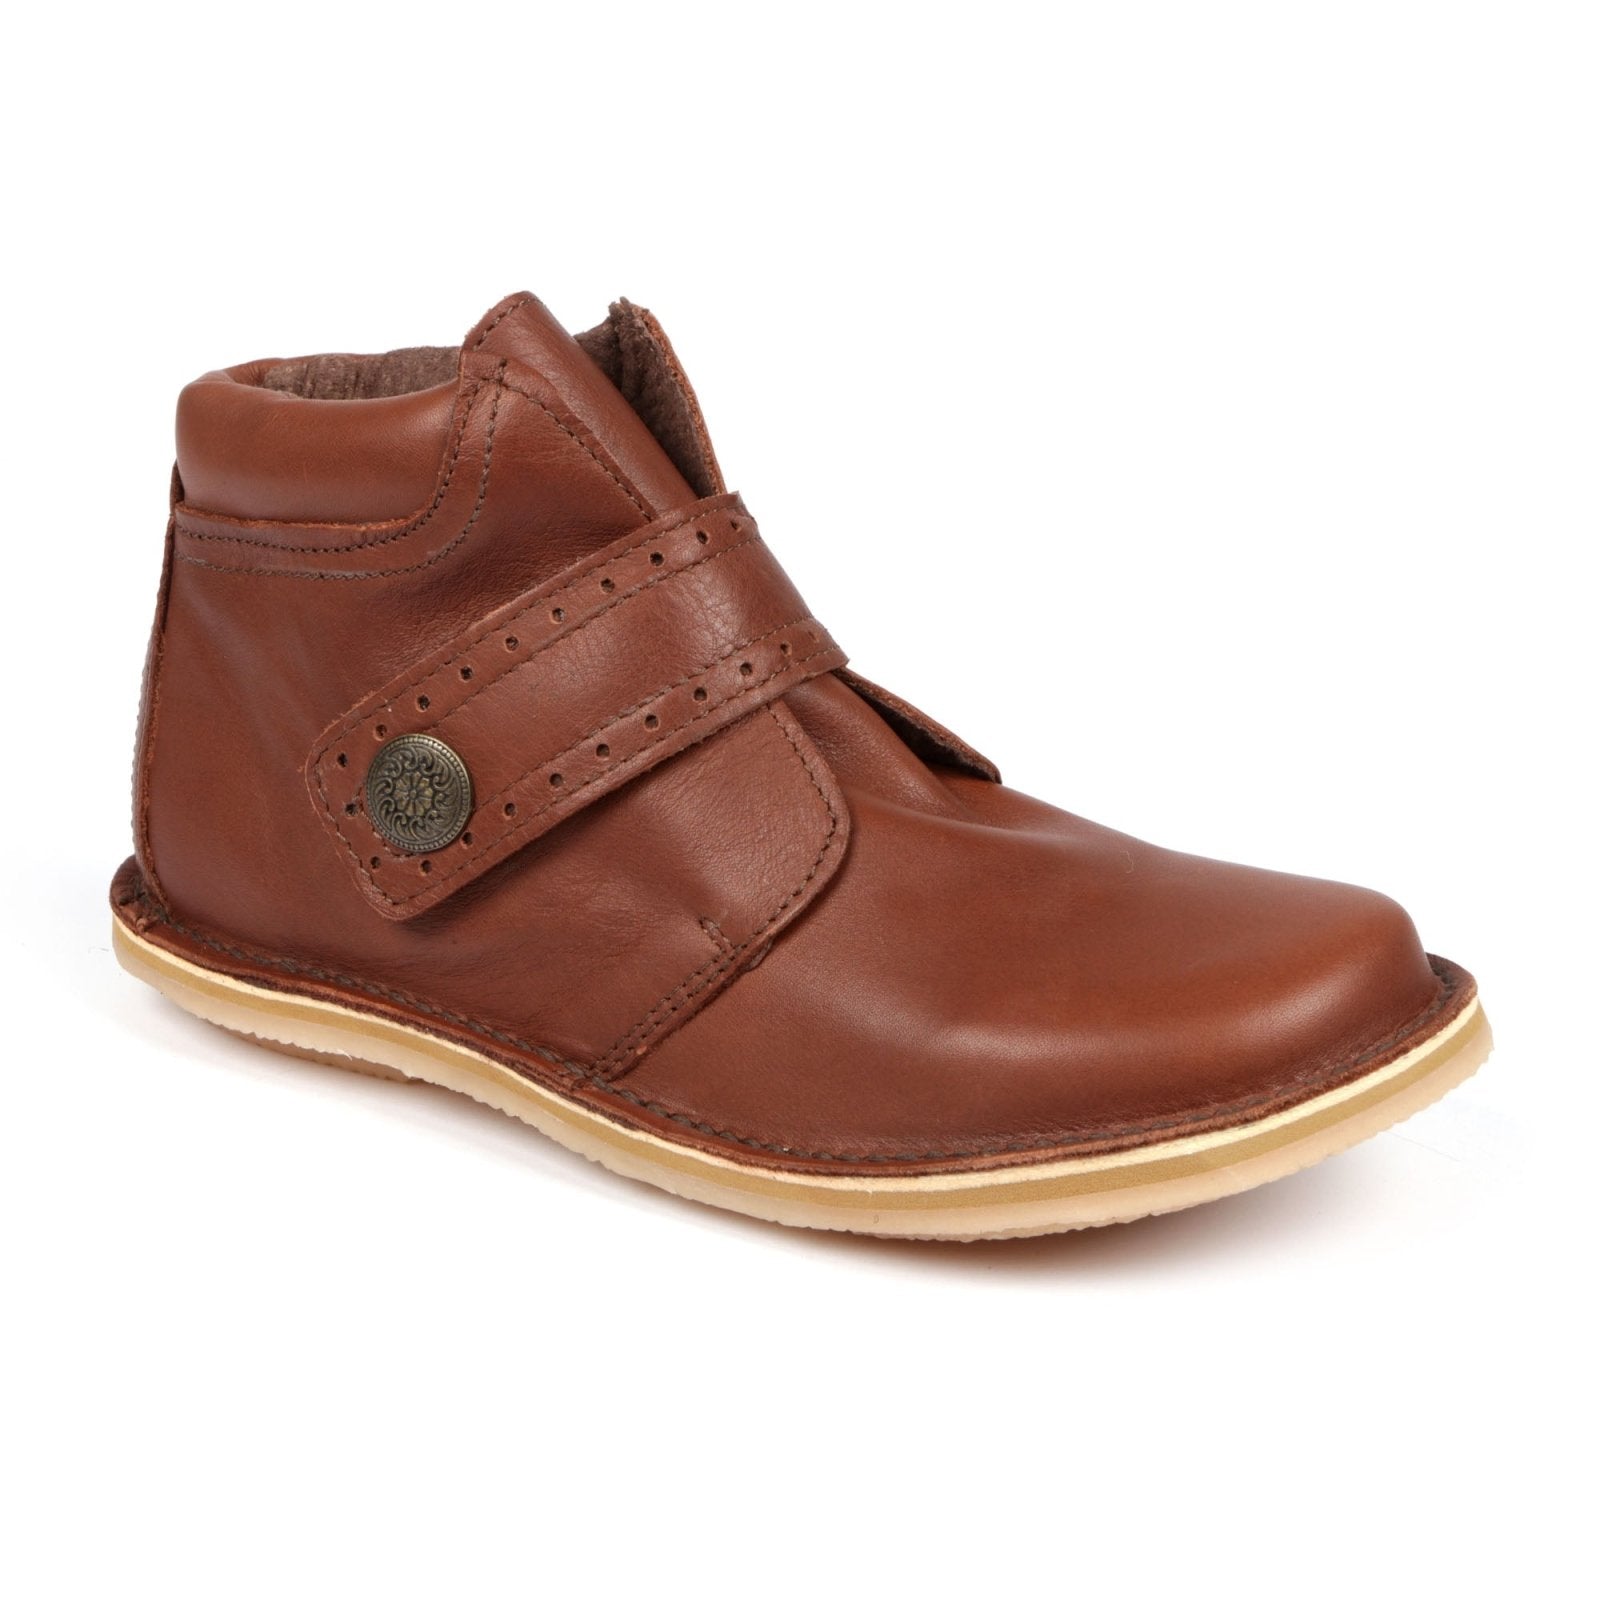 Morag Soft Premium Leather Ladies Boot - Freestyle SA Proudly local leather boots veldskoens vellies leather shoes suede veldskoens